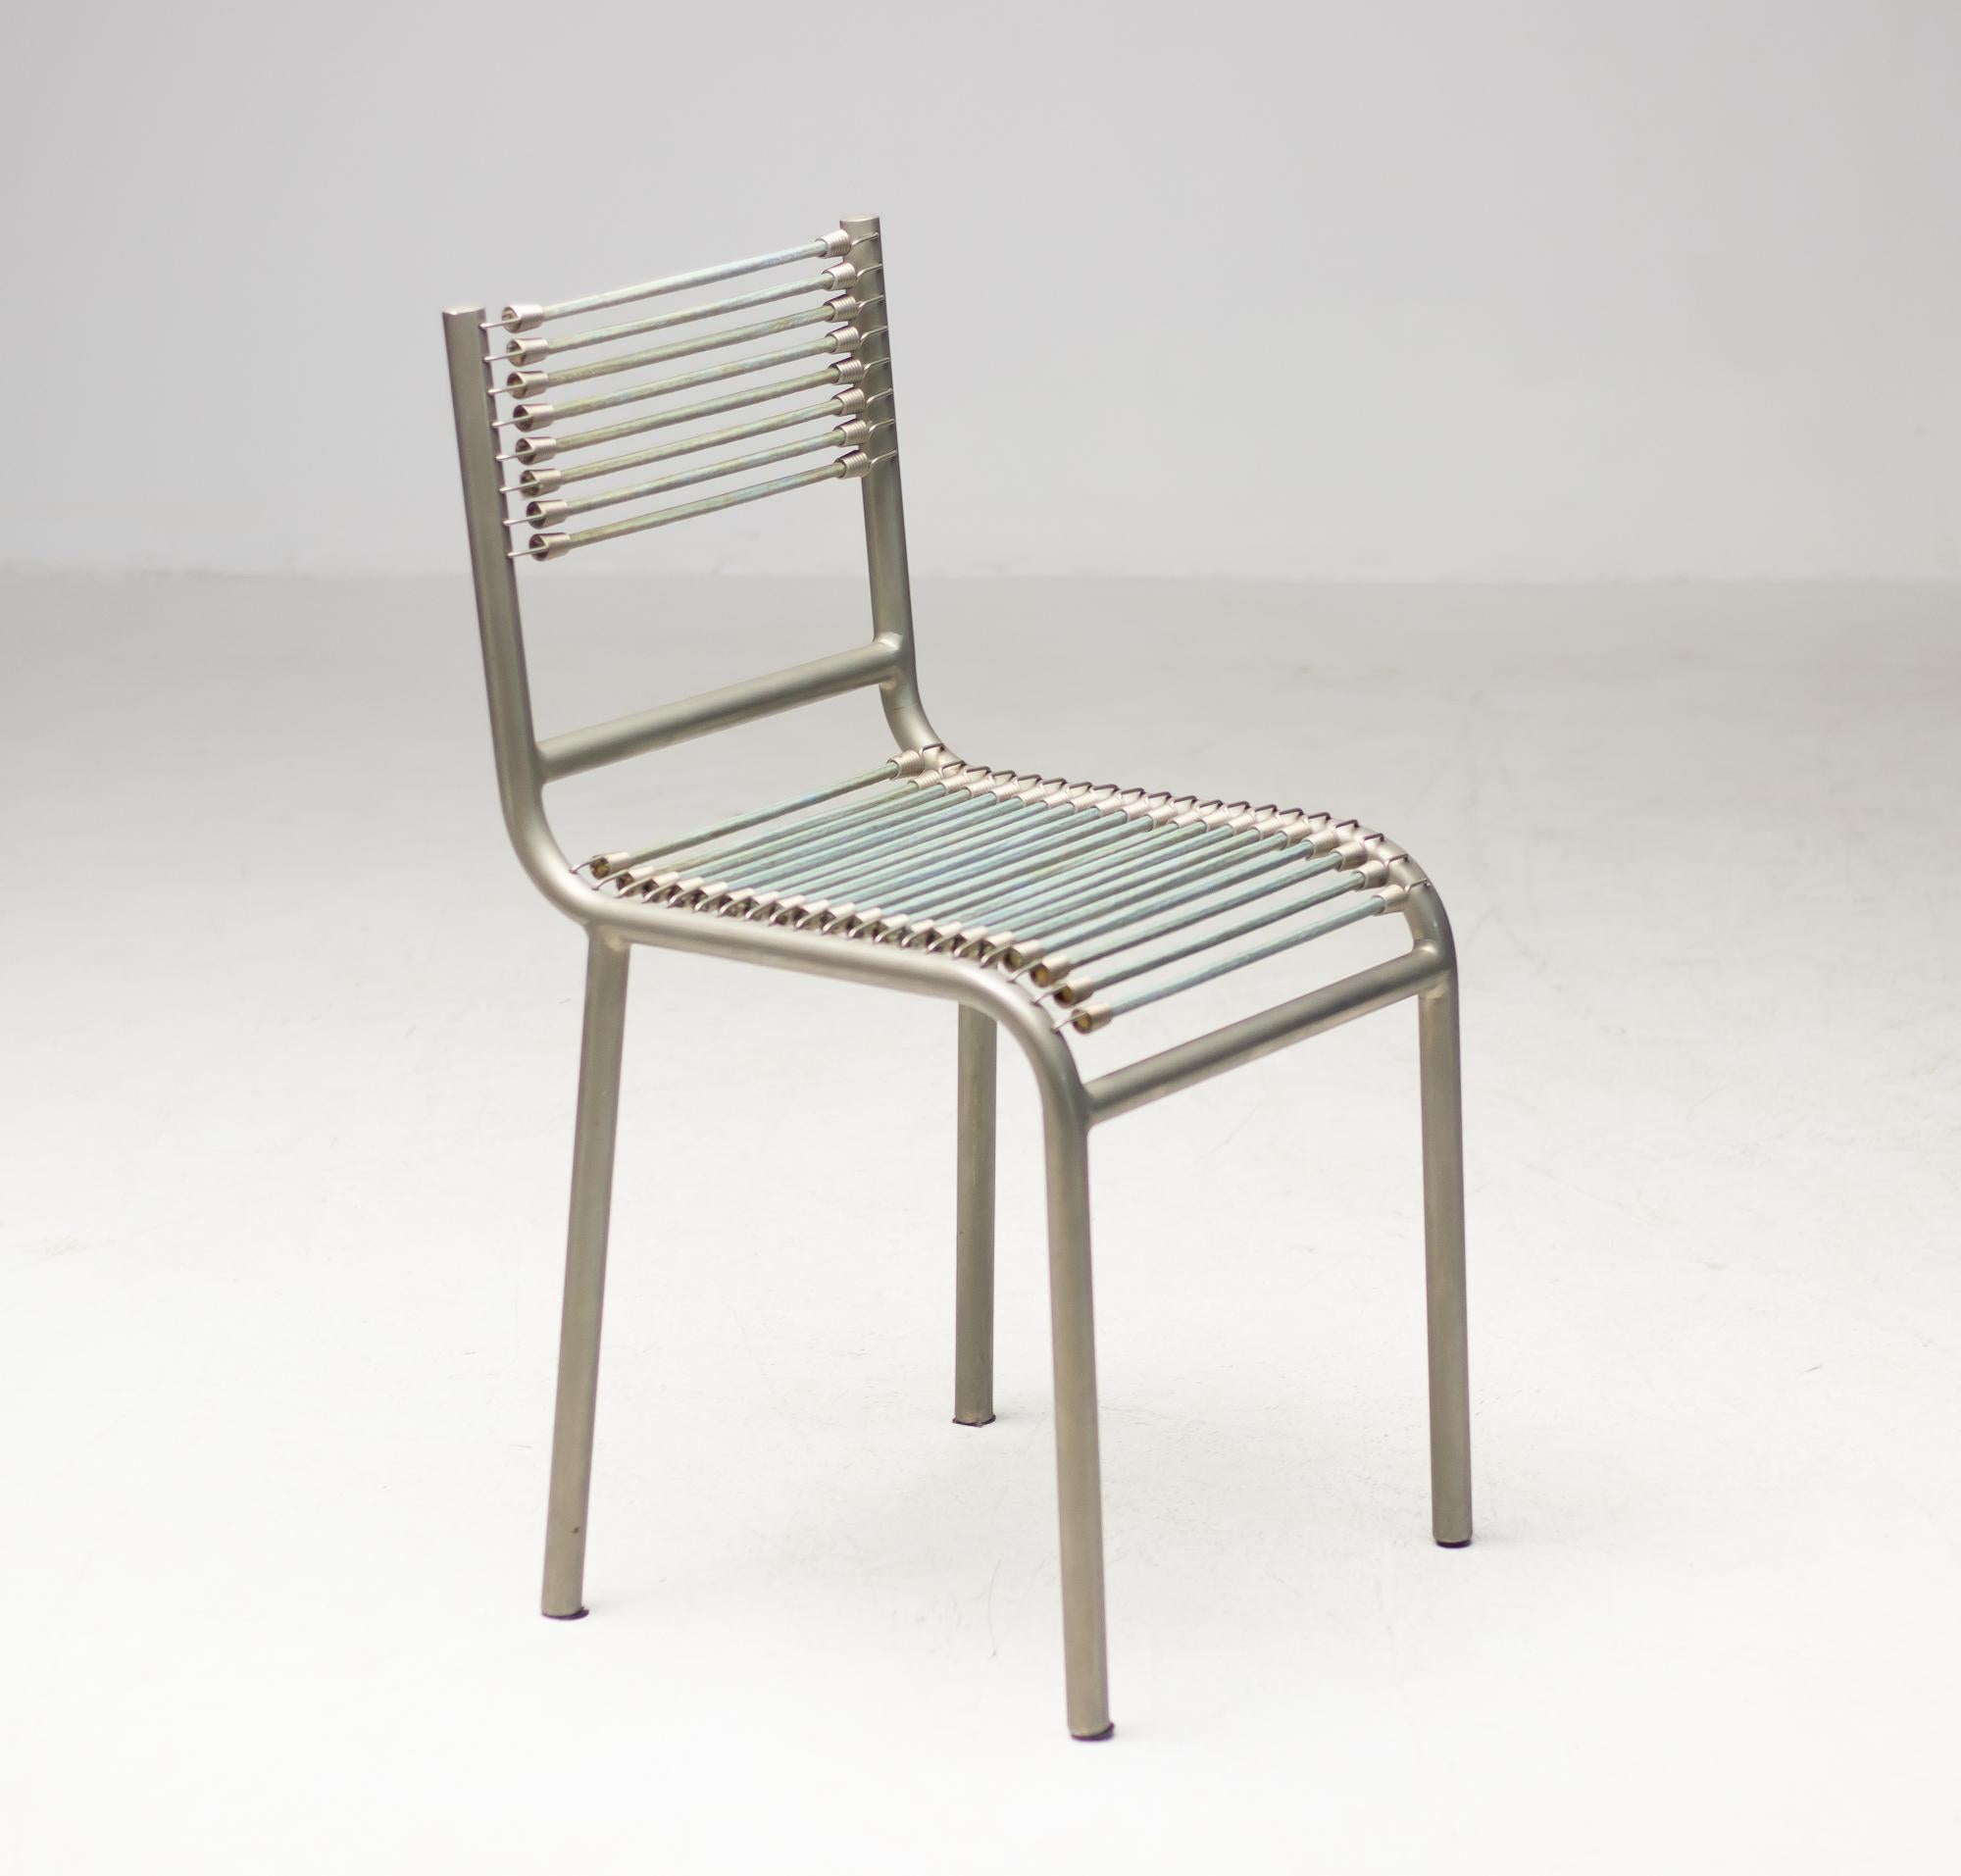 René Herbst Sandows chair with nickel-plated frame, designed in 1928 and introduced at the Salon d' Automne in 1929.
This chair produced, circa 1950.
The design is part of the MoMa NY museum collection.